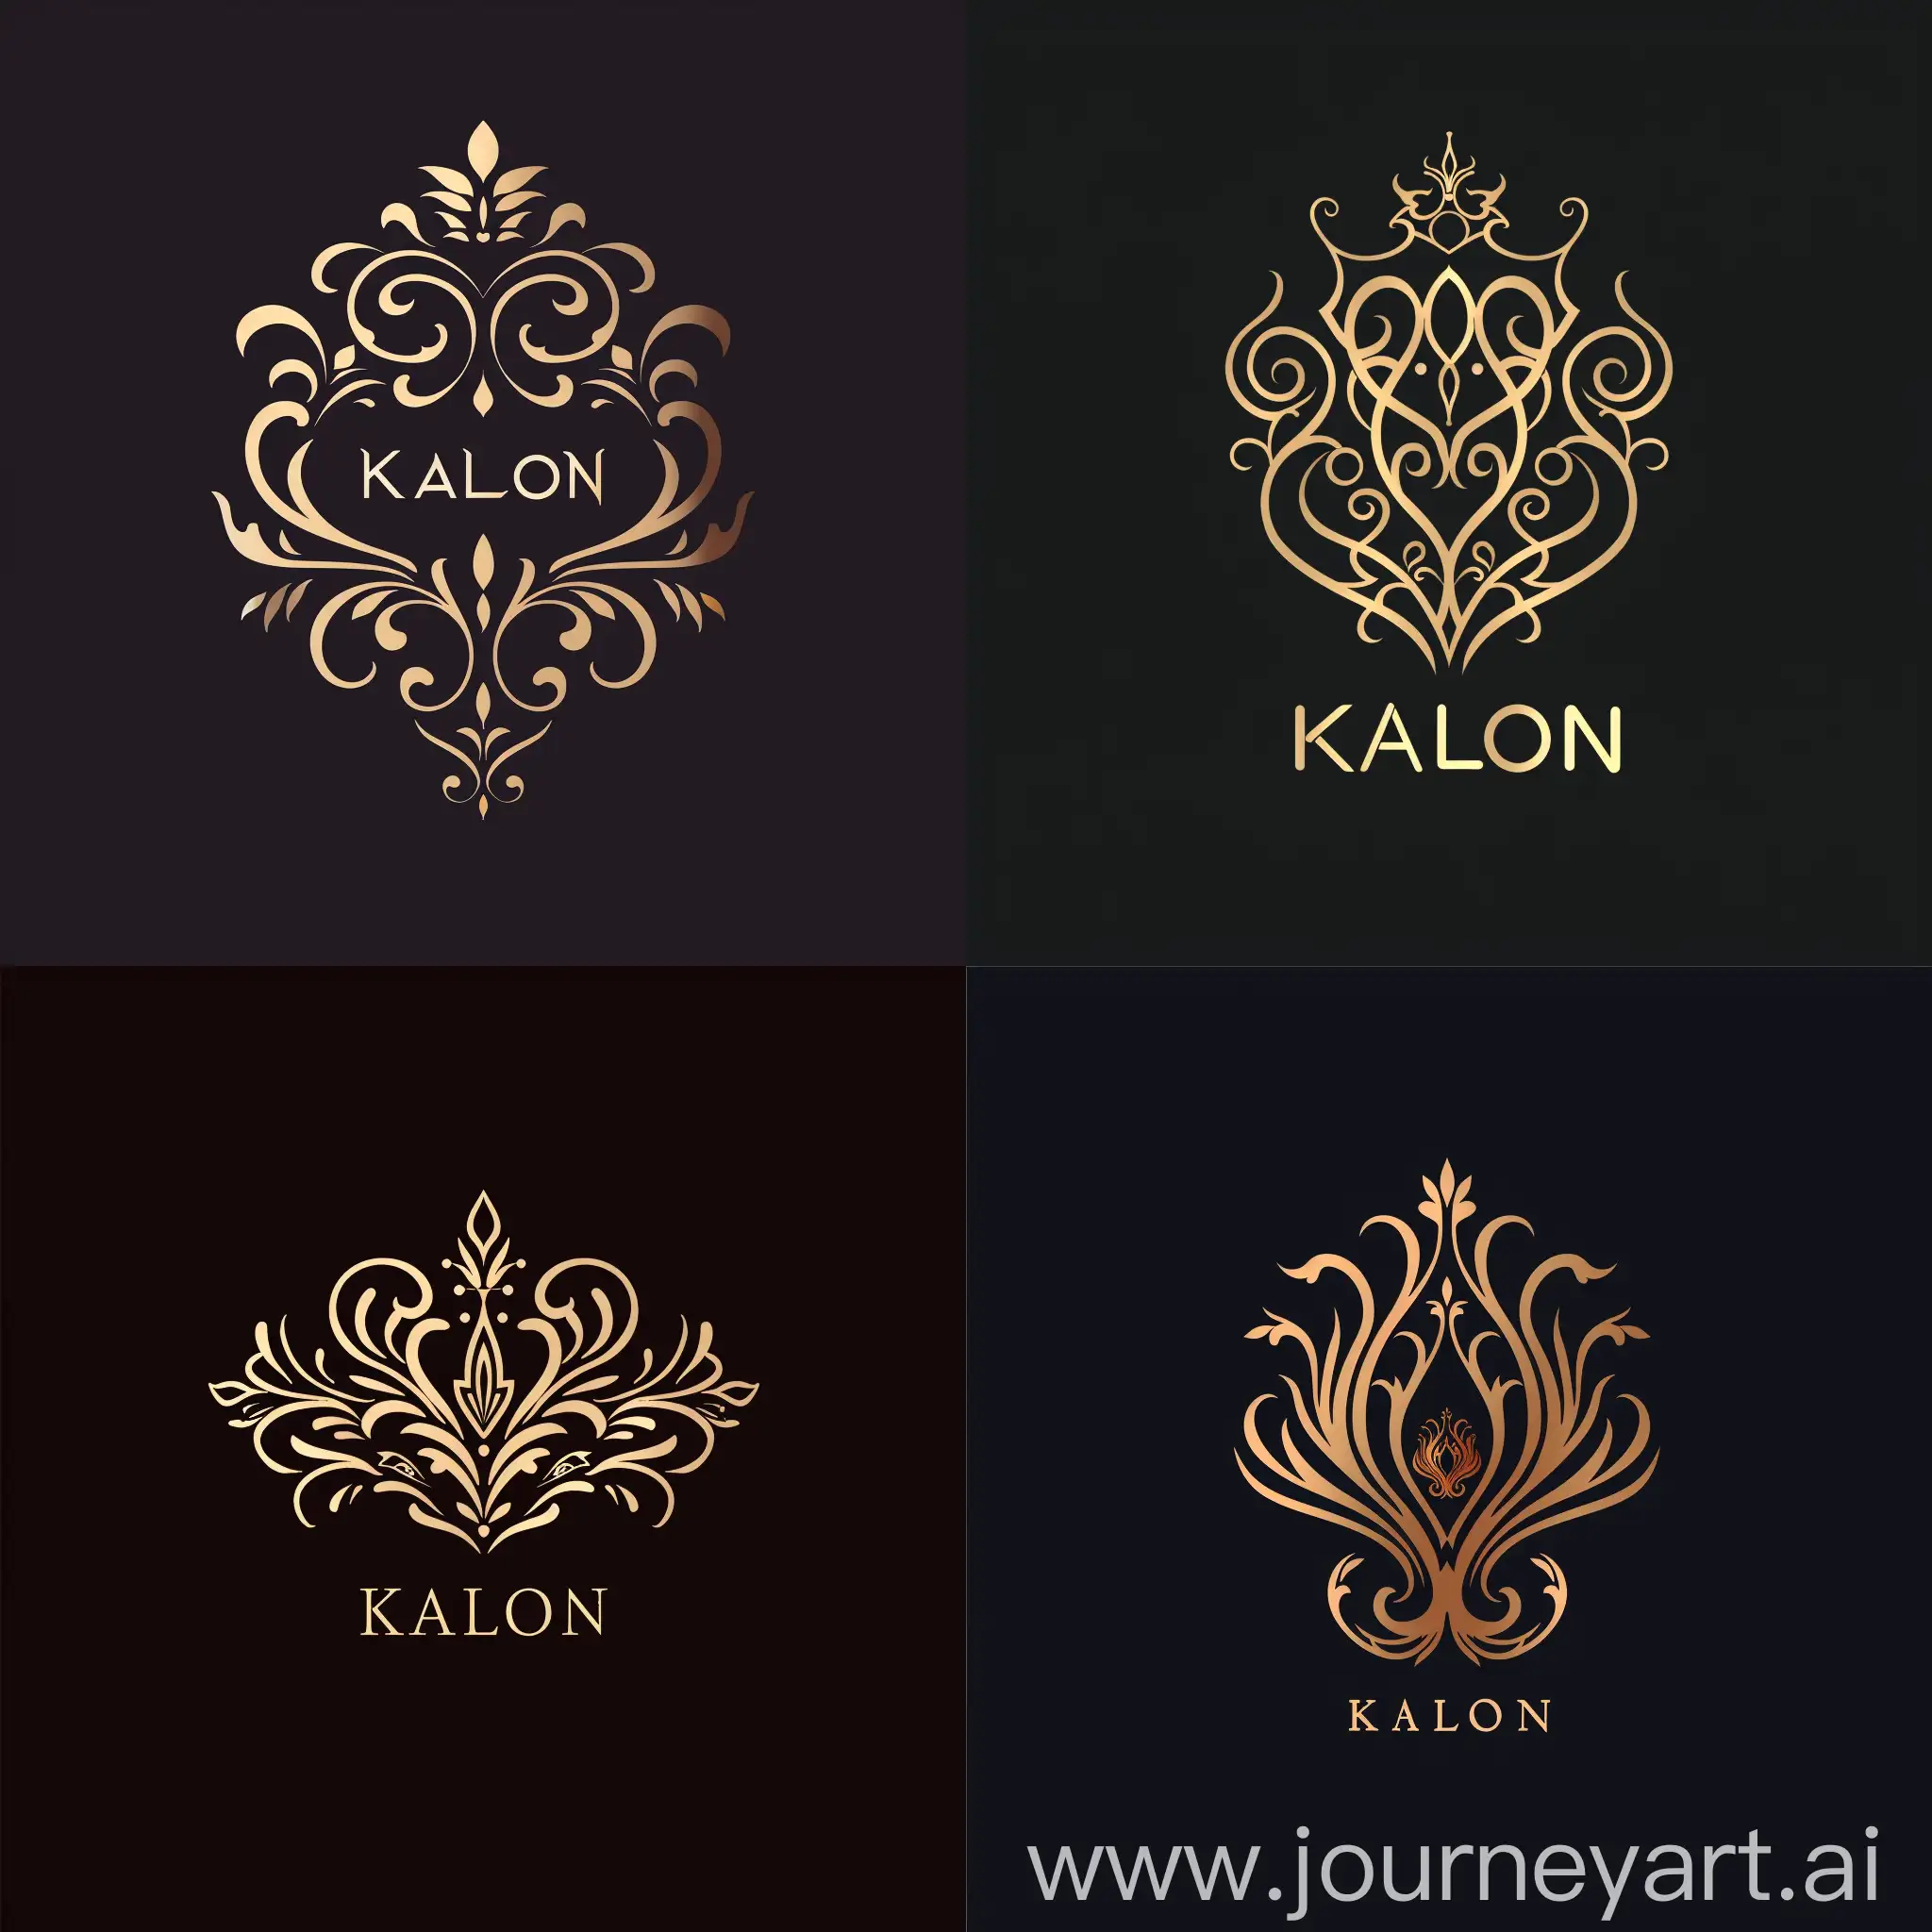 Design a logo for an Instagram page made to sell women's clothes. The page name is "Kalon".  A completely feminine and majestic logo.